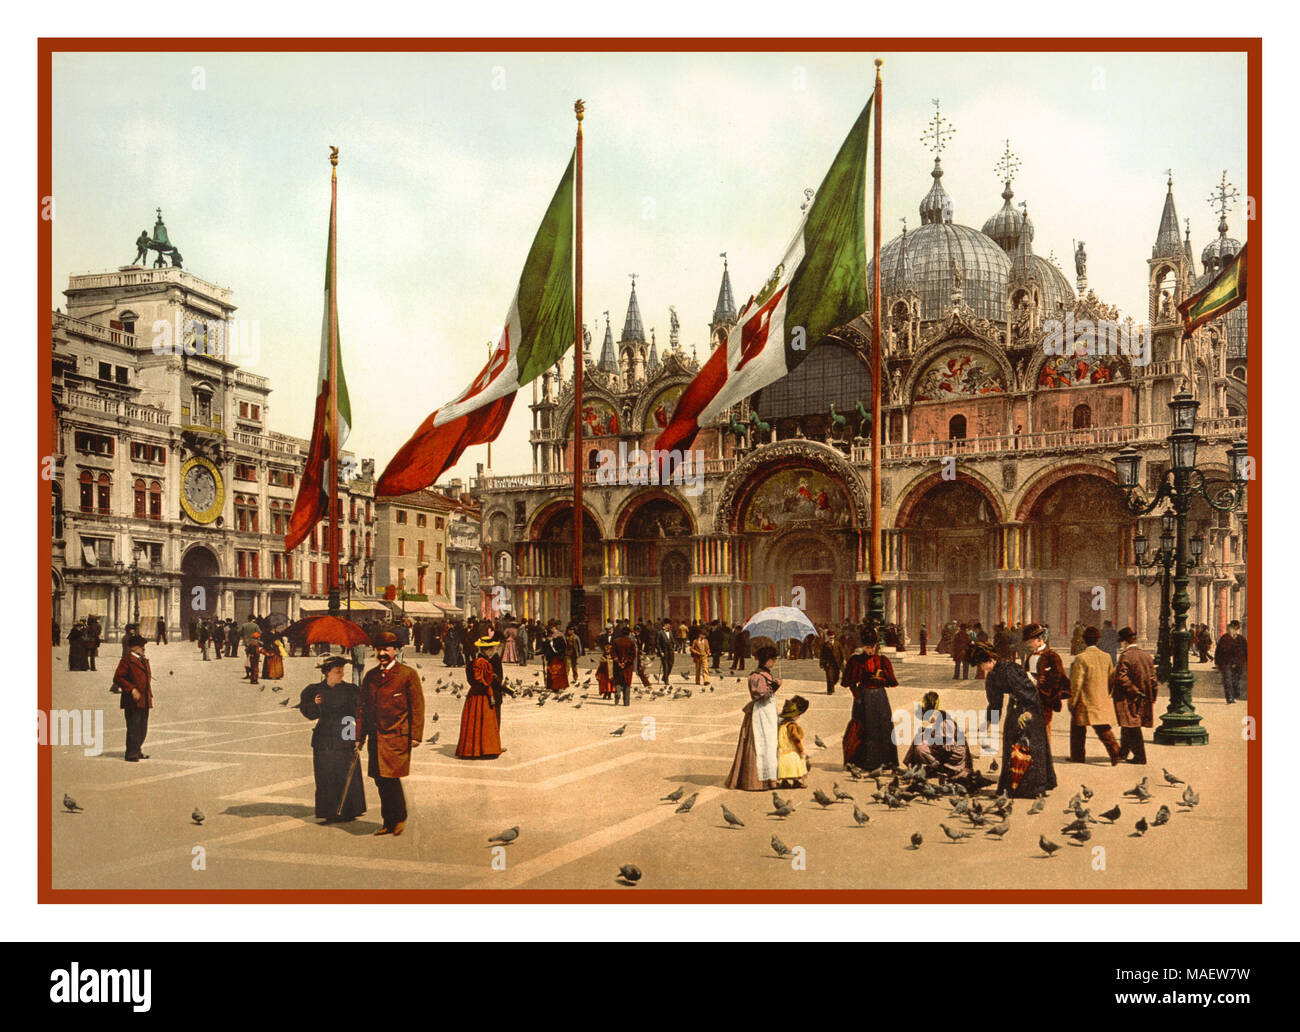 1890’s-1900 VINTAGE VENICE TOURISTS Photochrom Historic Vintage Old Venice St. Mark's Basilica Square Piazza Tourists 1890’s Fashion clothing style and the clock tower 1890-1900 Chromolithograph post colour photochrom printing technique Stock Photo